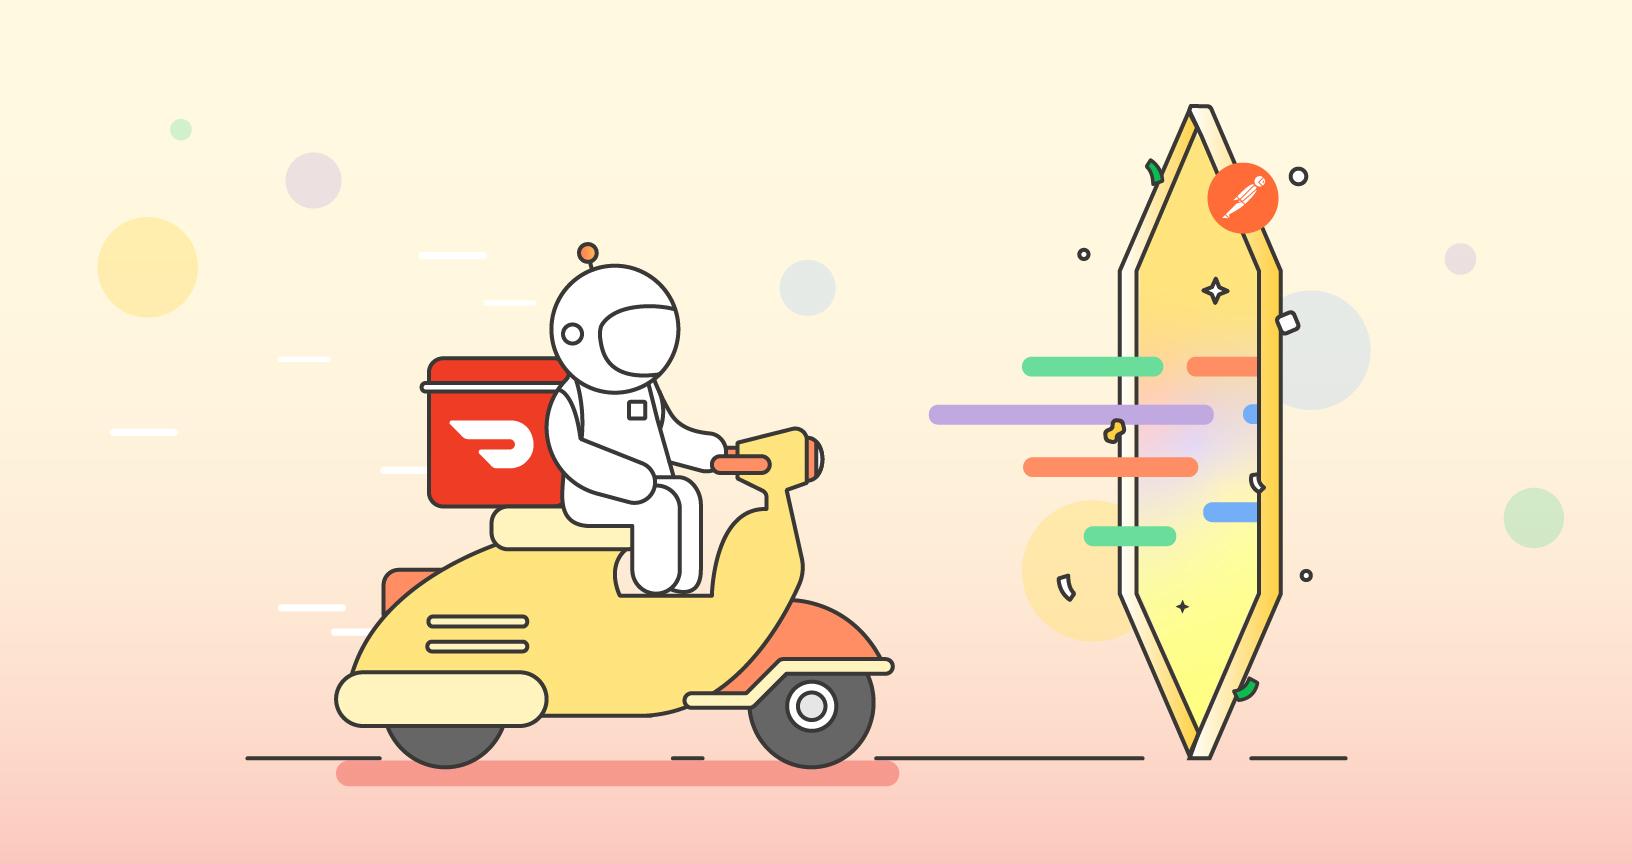 An illustration showing a DoorDash driver on a scooter driving through a portal